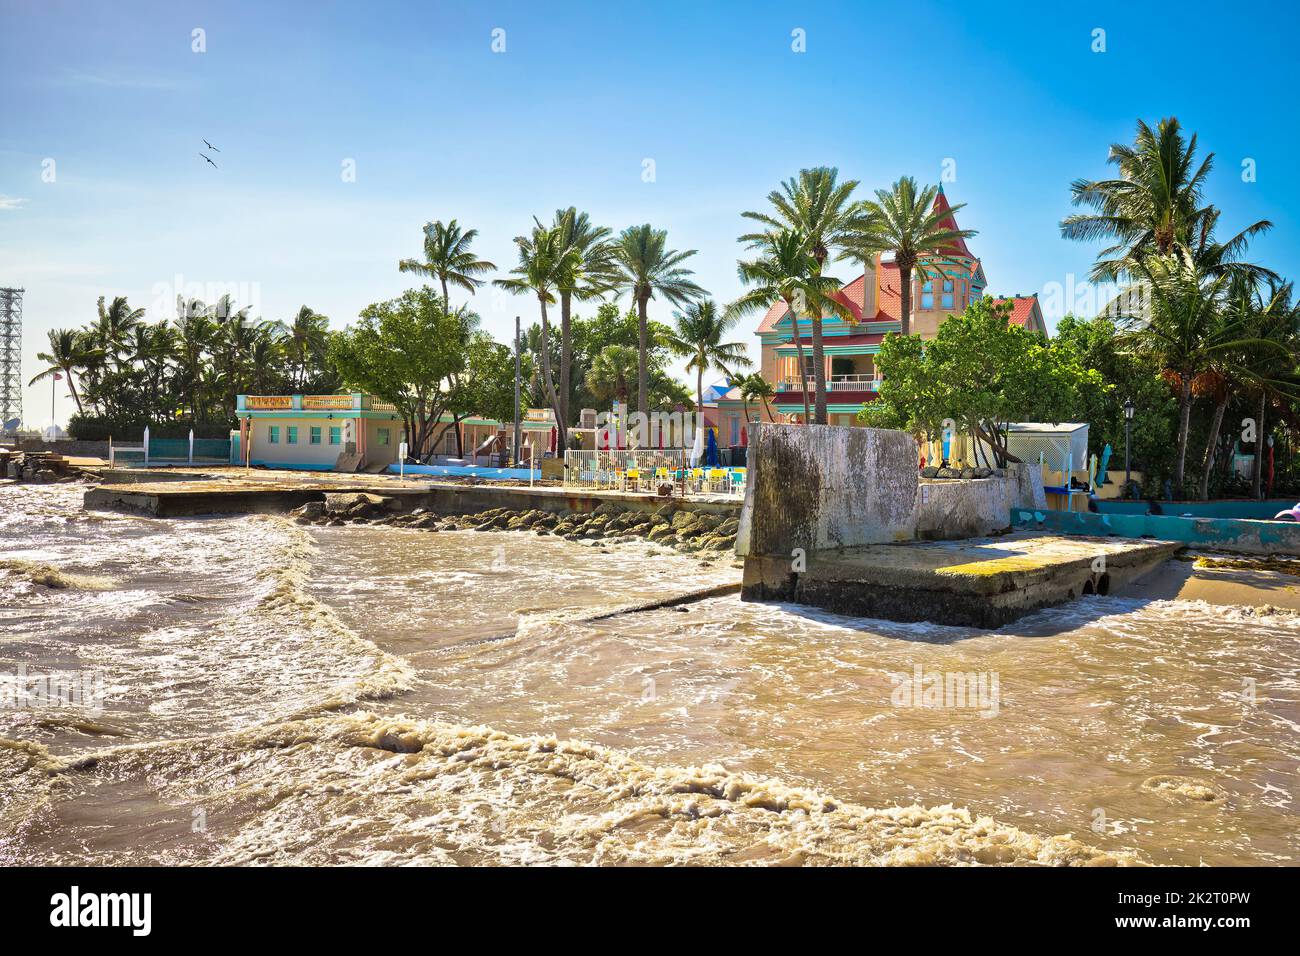 Duval Street Pocket Park beach and waterfront in Key West view, south Florida Keys Stock Photo